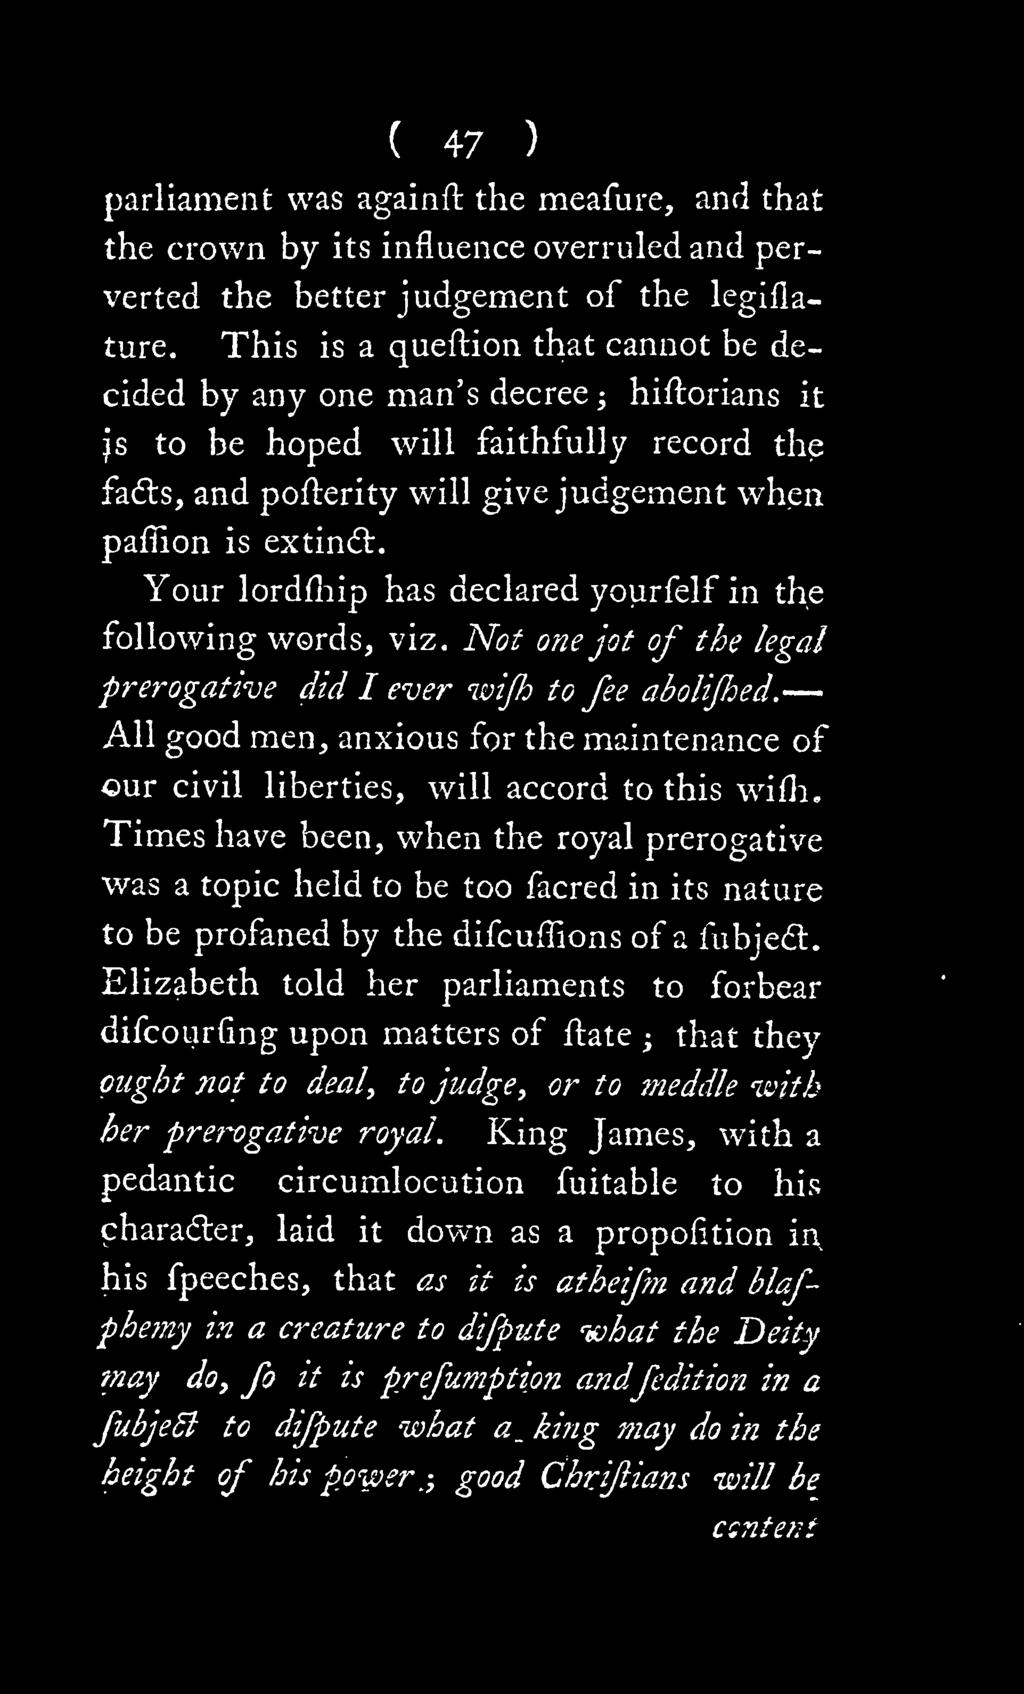 ( 47 ) parliament was againft the meafure, and that the crown by its influence overruled and perverted the better judgement of the legiflature.